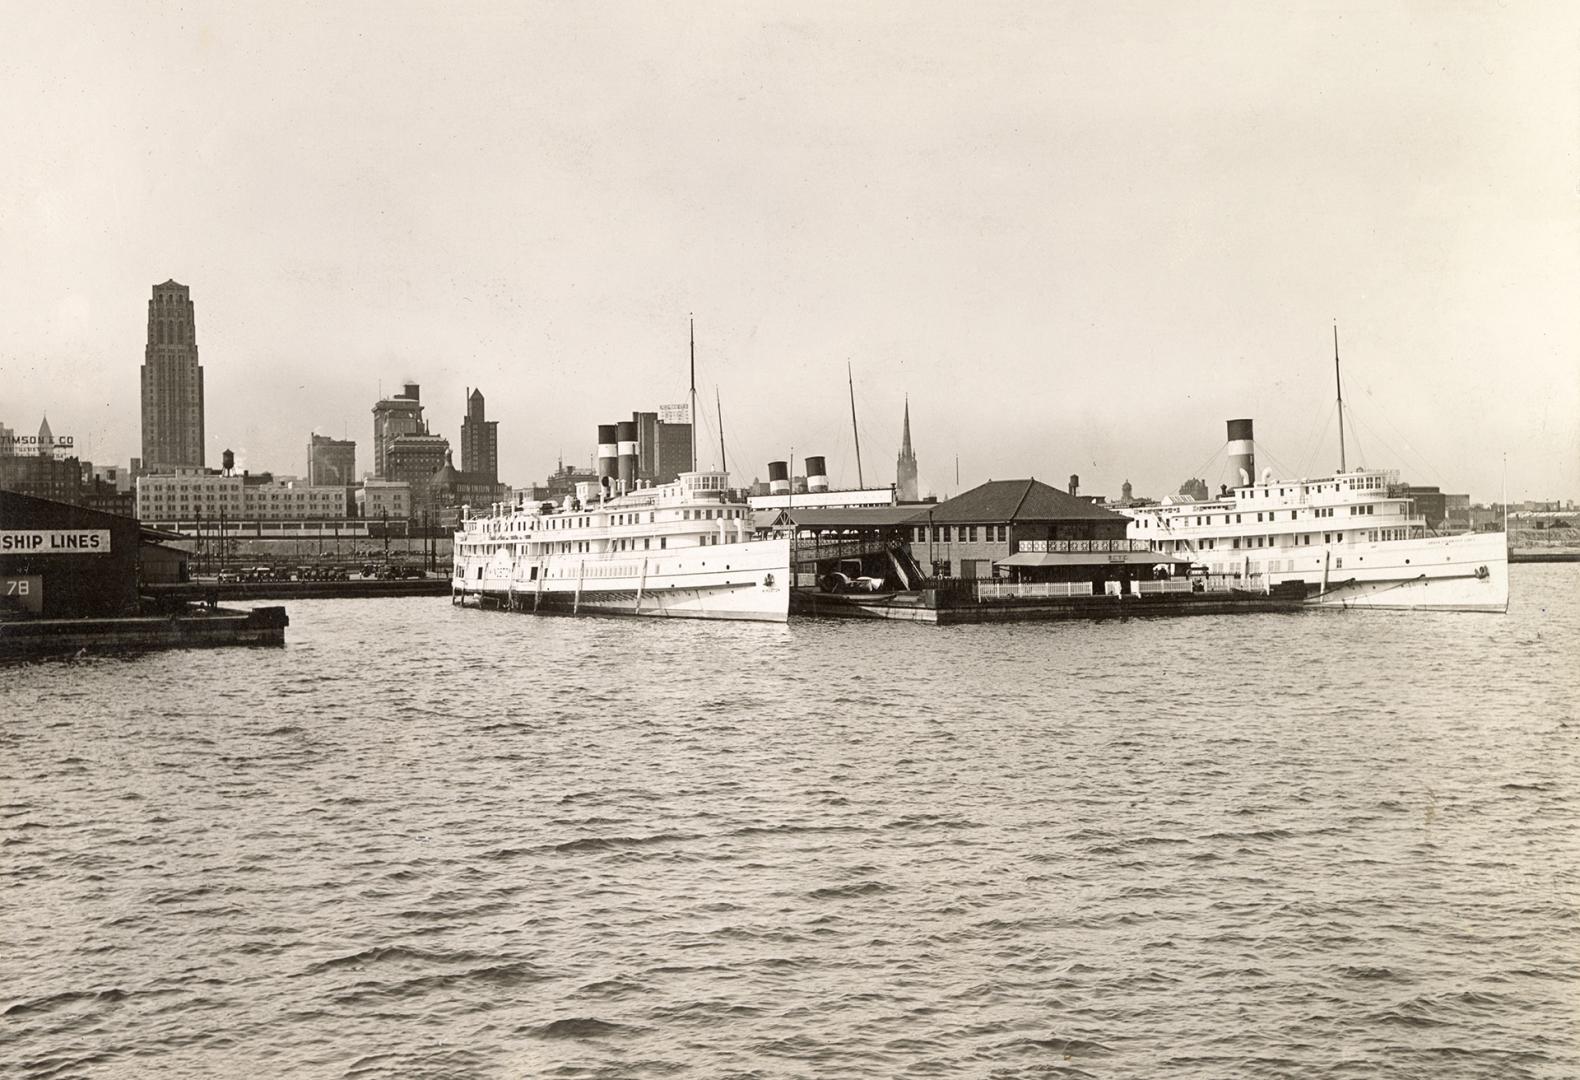 Image shows a few ships at the passenger terminal.